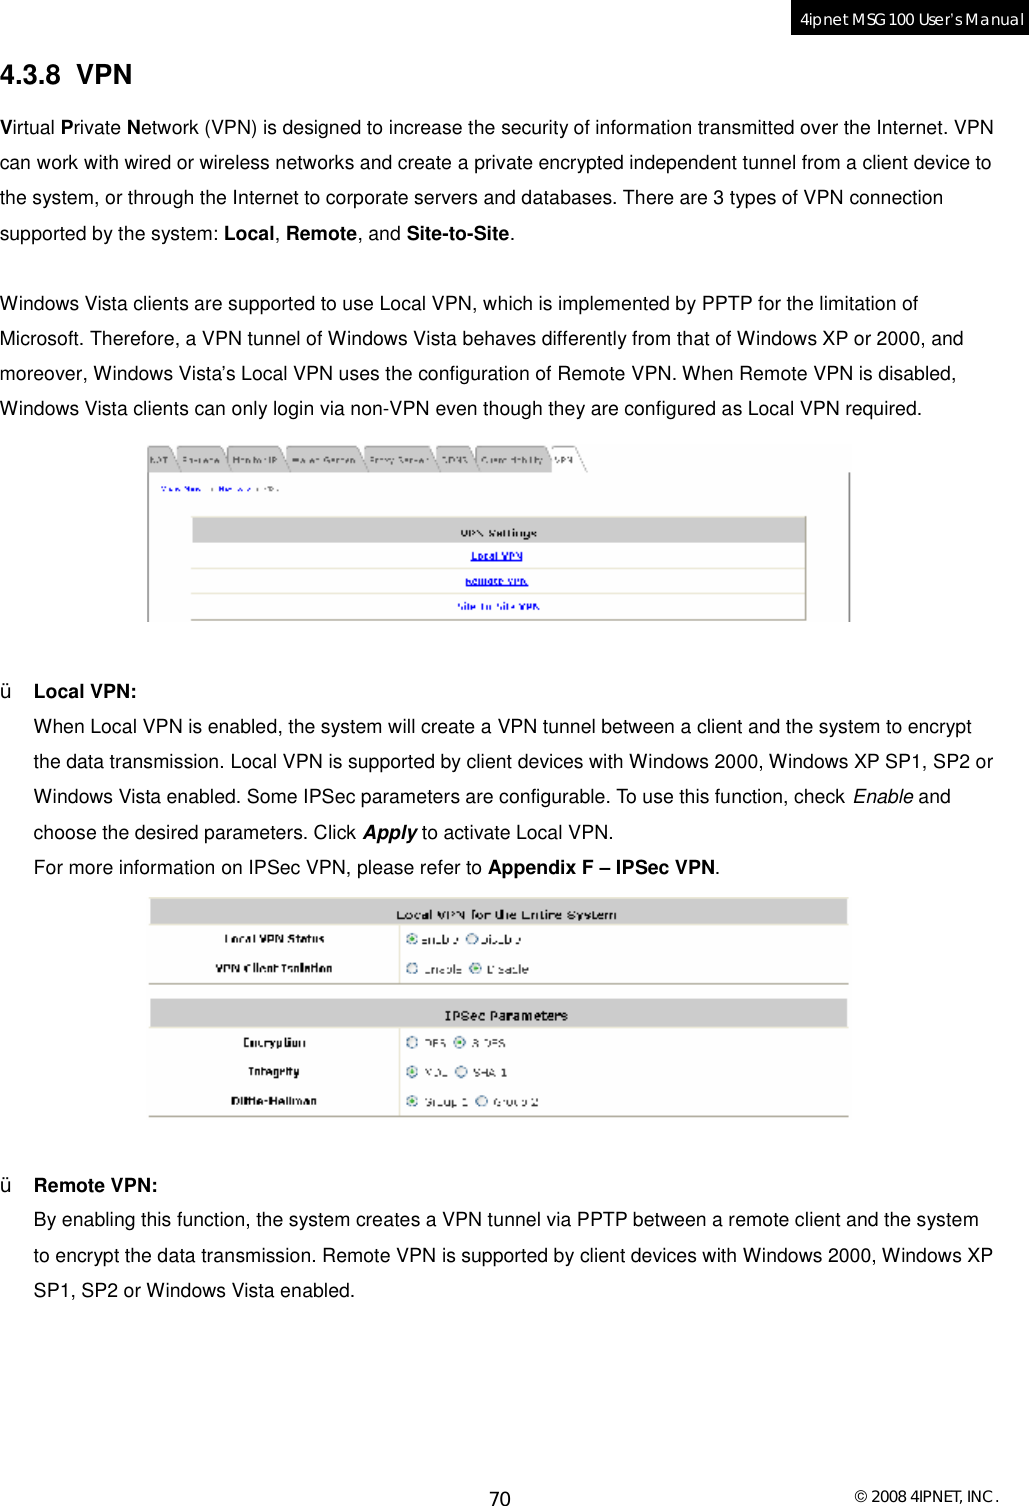  © 2008 4IPNET, INC. 70 4ipnet MSG100 User’s Manual  4.3.8 VPN Virtual Private Network (VPN) is designed to increase the security of information transmitted over the Internet. VPN can work with wired or wireless networks and create a private encrypted independent tunnel from a client device to the system, or through the Internet to corporate servers and databases. There are 3 types of VPN connection supported by the system: Local, Remote, and Site-to-Site.  Windows Vista clients are supported to use Local VPN, which is implemented by PPTP for the limitation of Microsoft. Therefore, a VPN tunnel of Windows Vista behaves differently from that of Windows XP or 2000, and moreover, Windows Vista’s Local VPN uses the configuration of Remote VPN. When Remote VPN is disabled, Windows Vista clients can only login via non-VPN even though they are configured as Local VPN required.   Ÿ Local VPN:  When Local VPN is enabled, the system will create a VPN tunnel between a client and the system to encrypt the data transmission. Local VPN is supported by client devices with Windows 2000, Windows XP SP1, SP2 or Windows Vista enabled. Some IPSec parameters are configurable. To use this function, check Enable and choose the desired parameters. Click Apply to activate Local VPN. For more information on IPSec VPN, please refer to Appendix F – IPSec VPN.   Ÿ Remote VPN: By enabling this function, the system creates a VPN tunnel via PPTP between a remote client and the system to encrypt the data transmission. Remote VPN is supported by client devices with Windows 2000, Windows XP SP1, SP2 or Windows Vista enabled.   